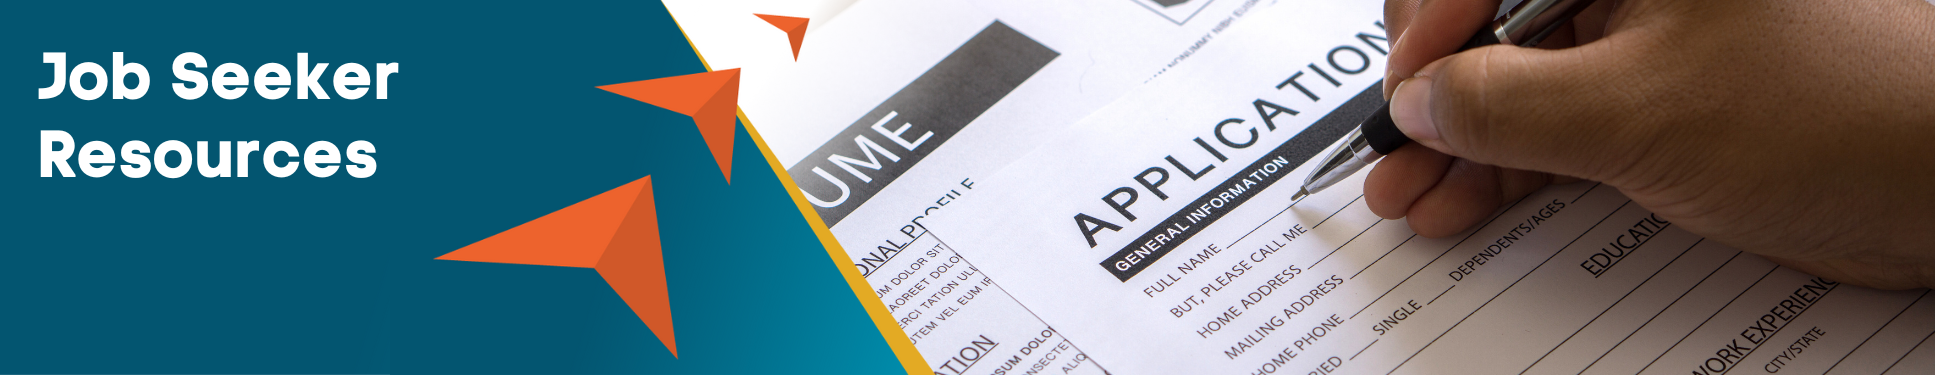 Job Seeker Resources banner with three orange arrows pointing to image of person's hand holding a pen filling out an application. 